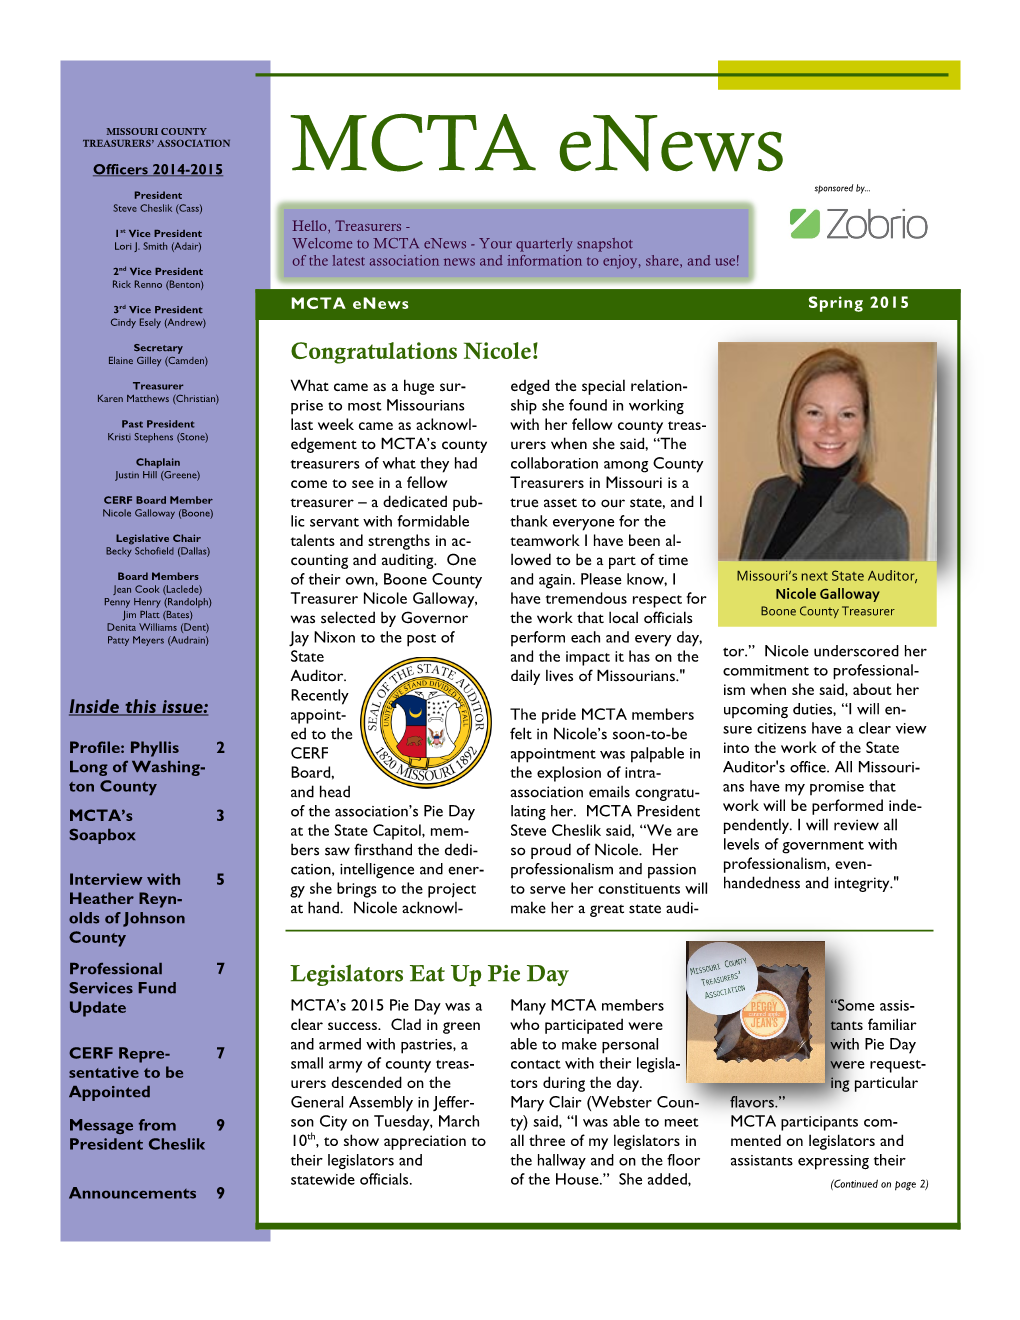 MCTA Enews Spring 2015 Cindy Esely (Andrew)